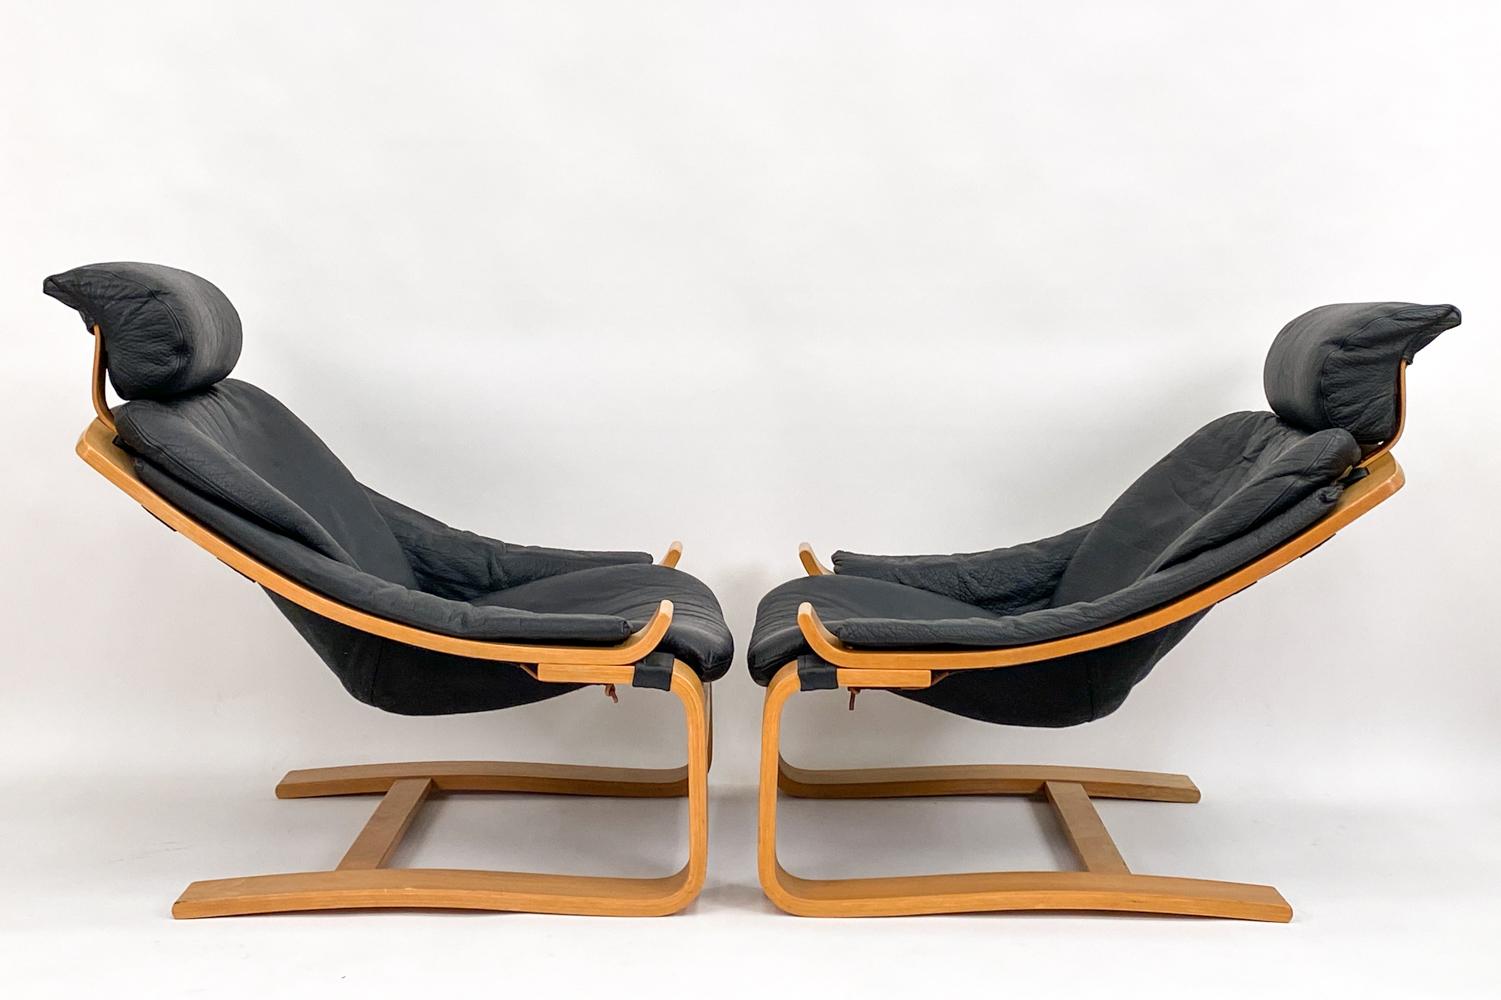 '4' Kroken Buffalo Leather Lounge Chairs by Åke Fribytter for Nelo Sweden, 1970s For Sale 1